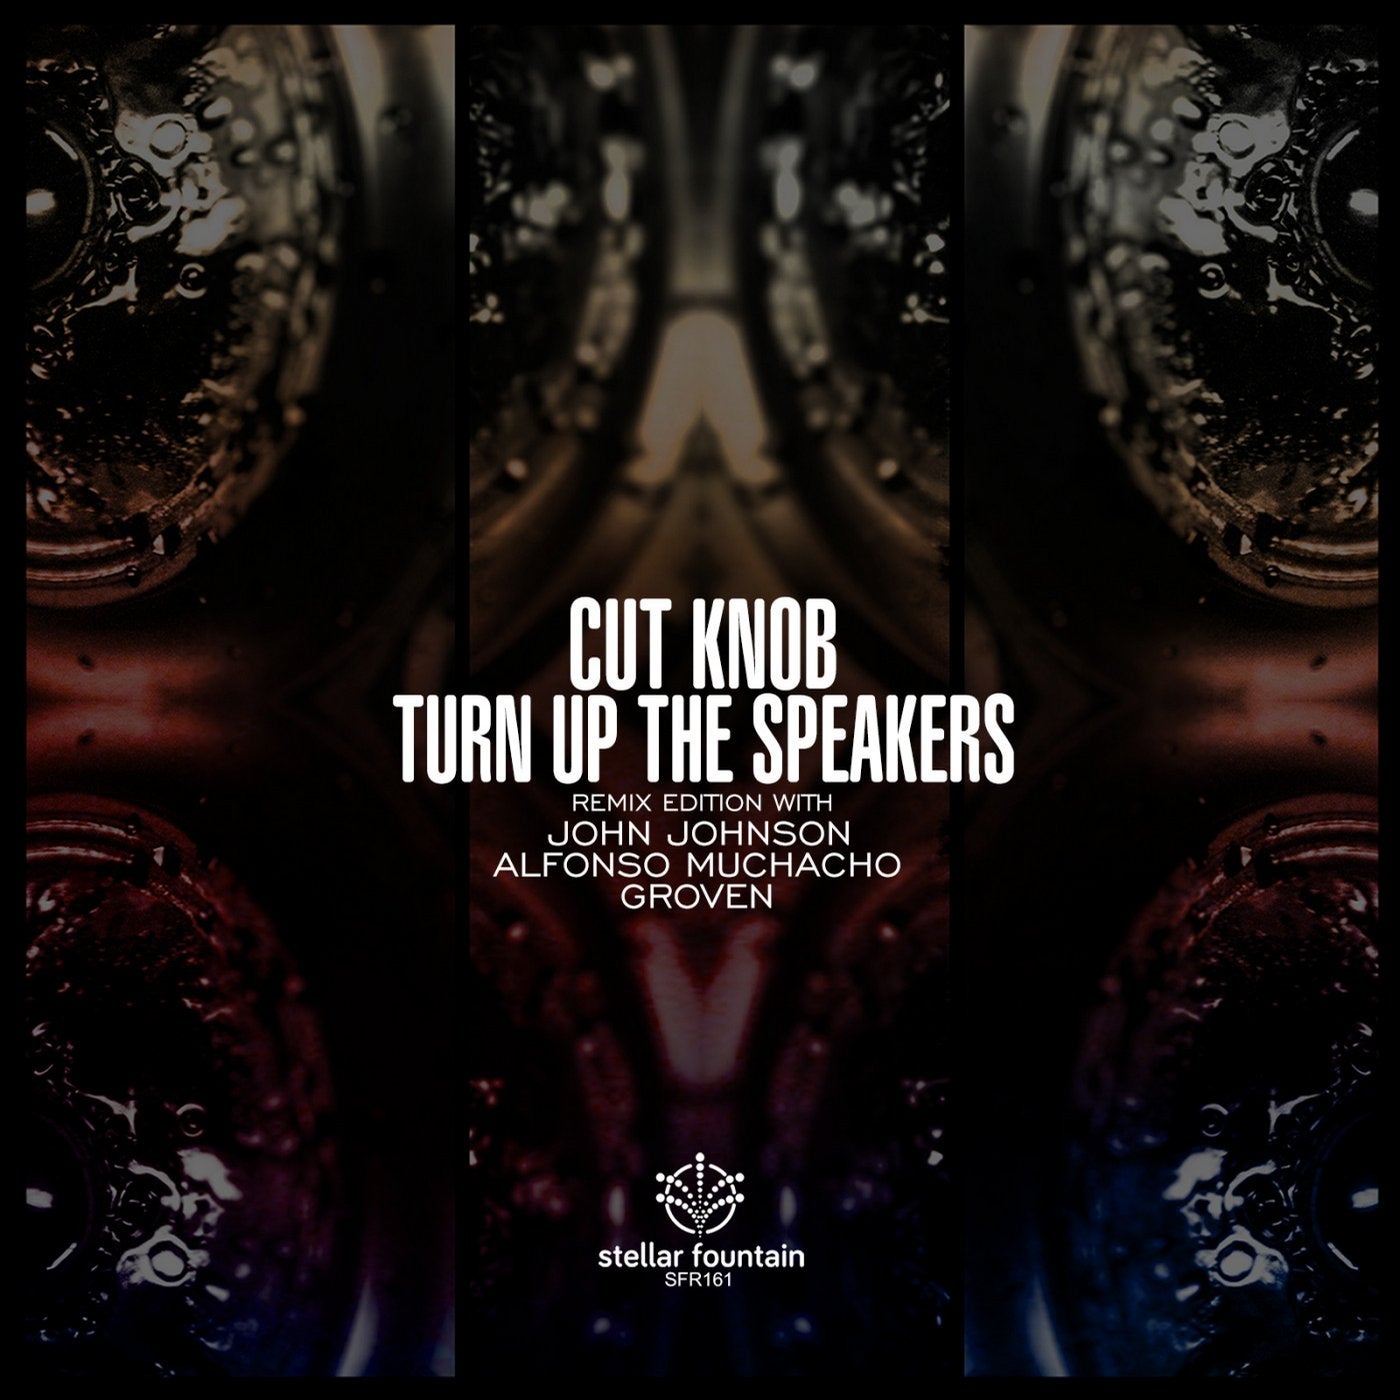 Turn Up the Speakers (Remix Edition)